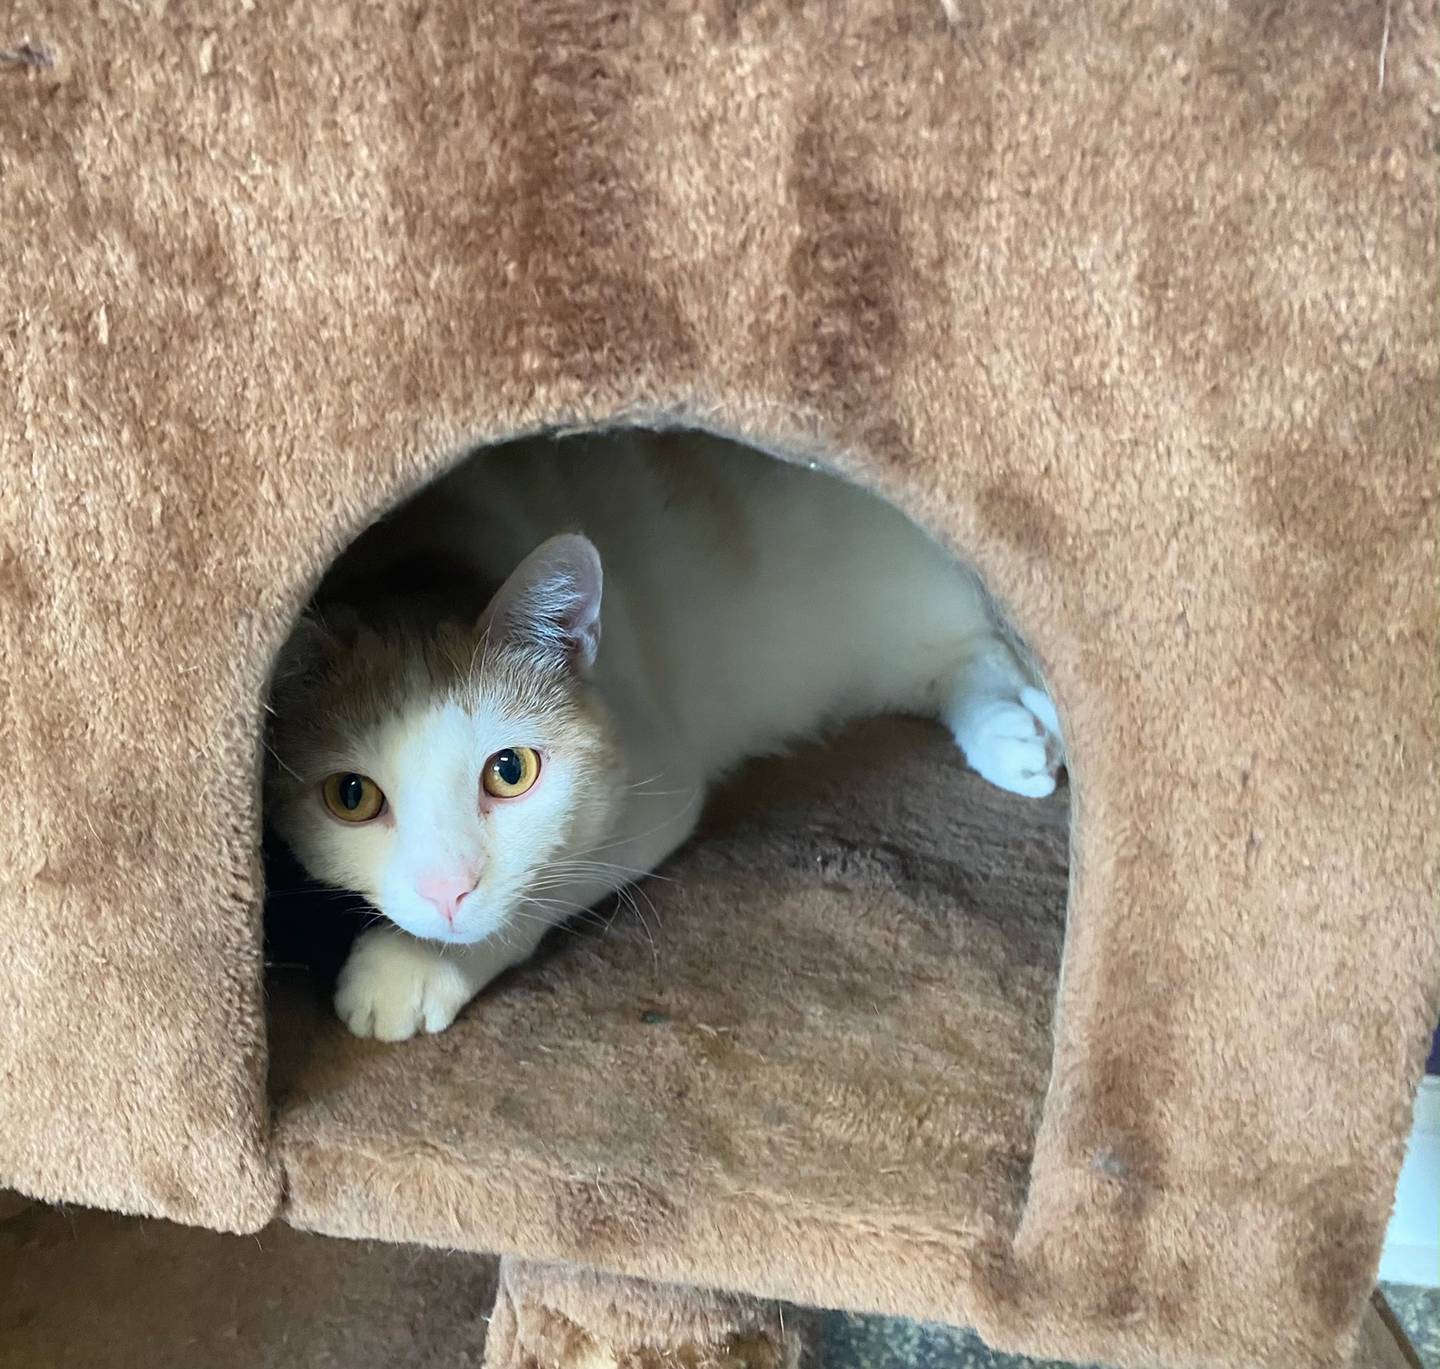 Jemima is a three- year-old buff and white domestic shorthair. She  is a sweet and playful.  Jemima plays well with other cats and is good with children. For more information on Jemima, including adoption fees please visit justanimals.org or call 815-448-2510.